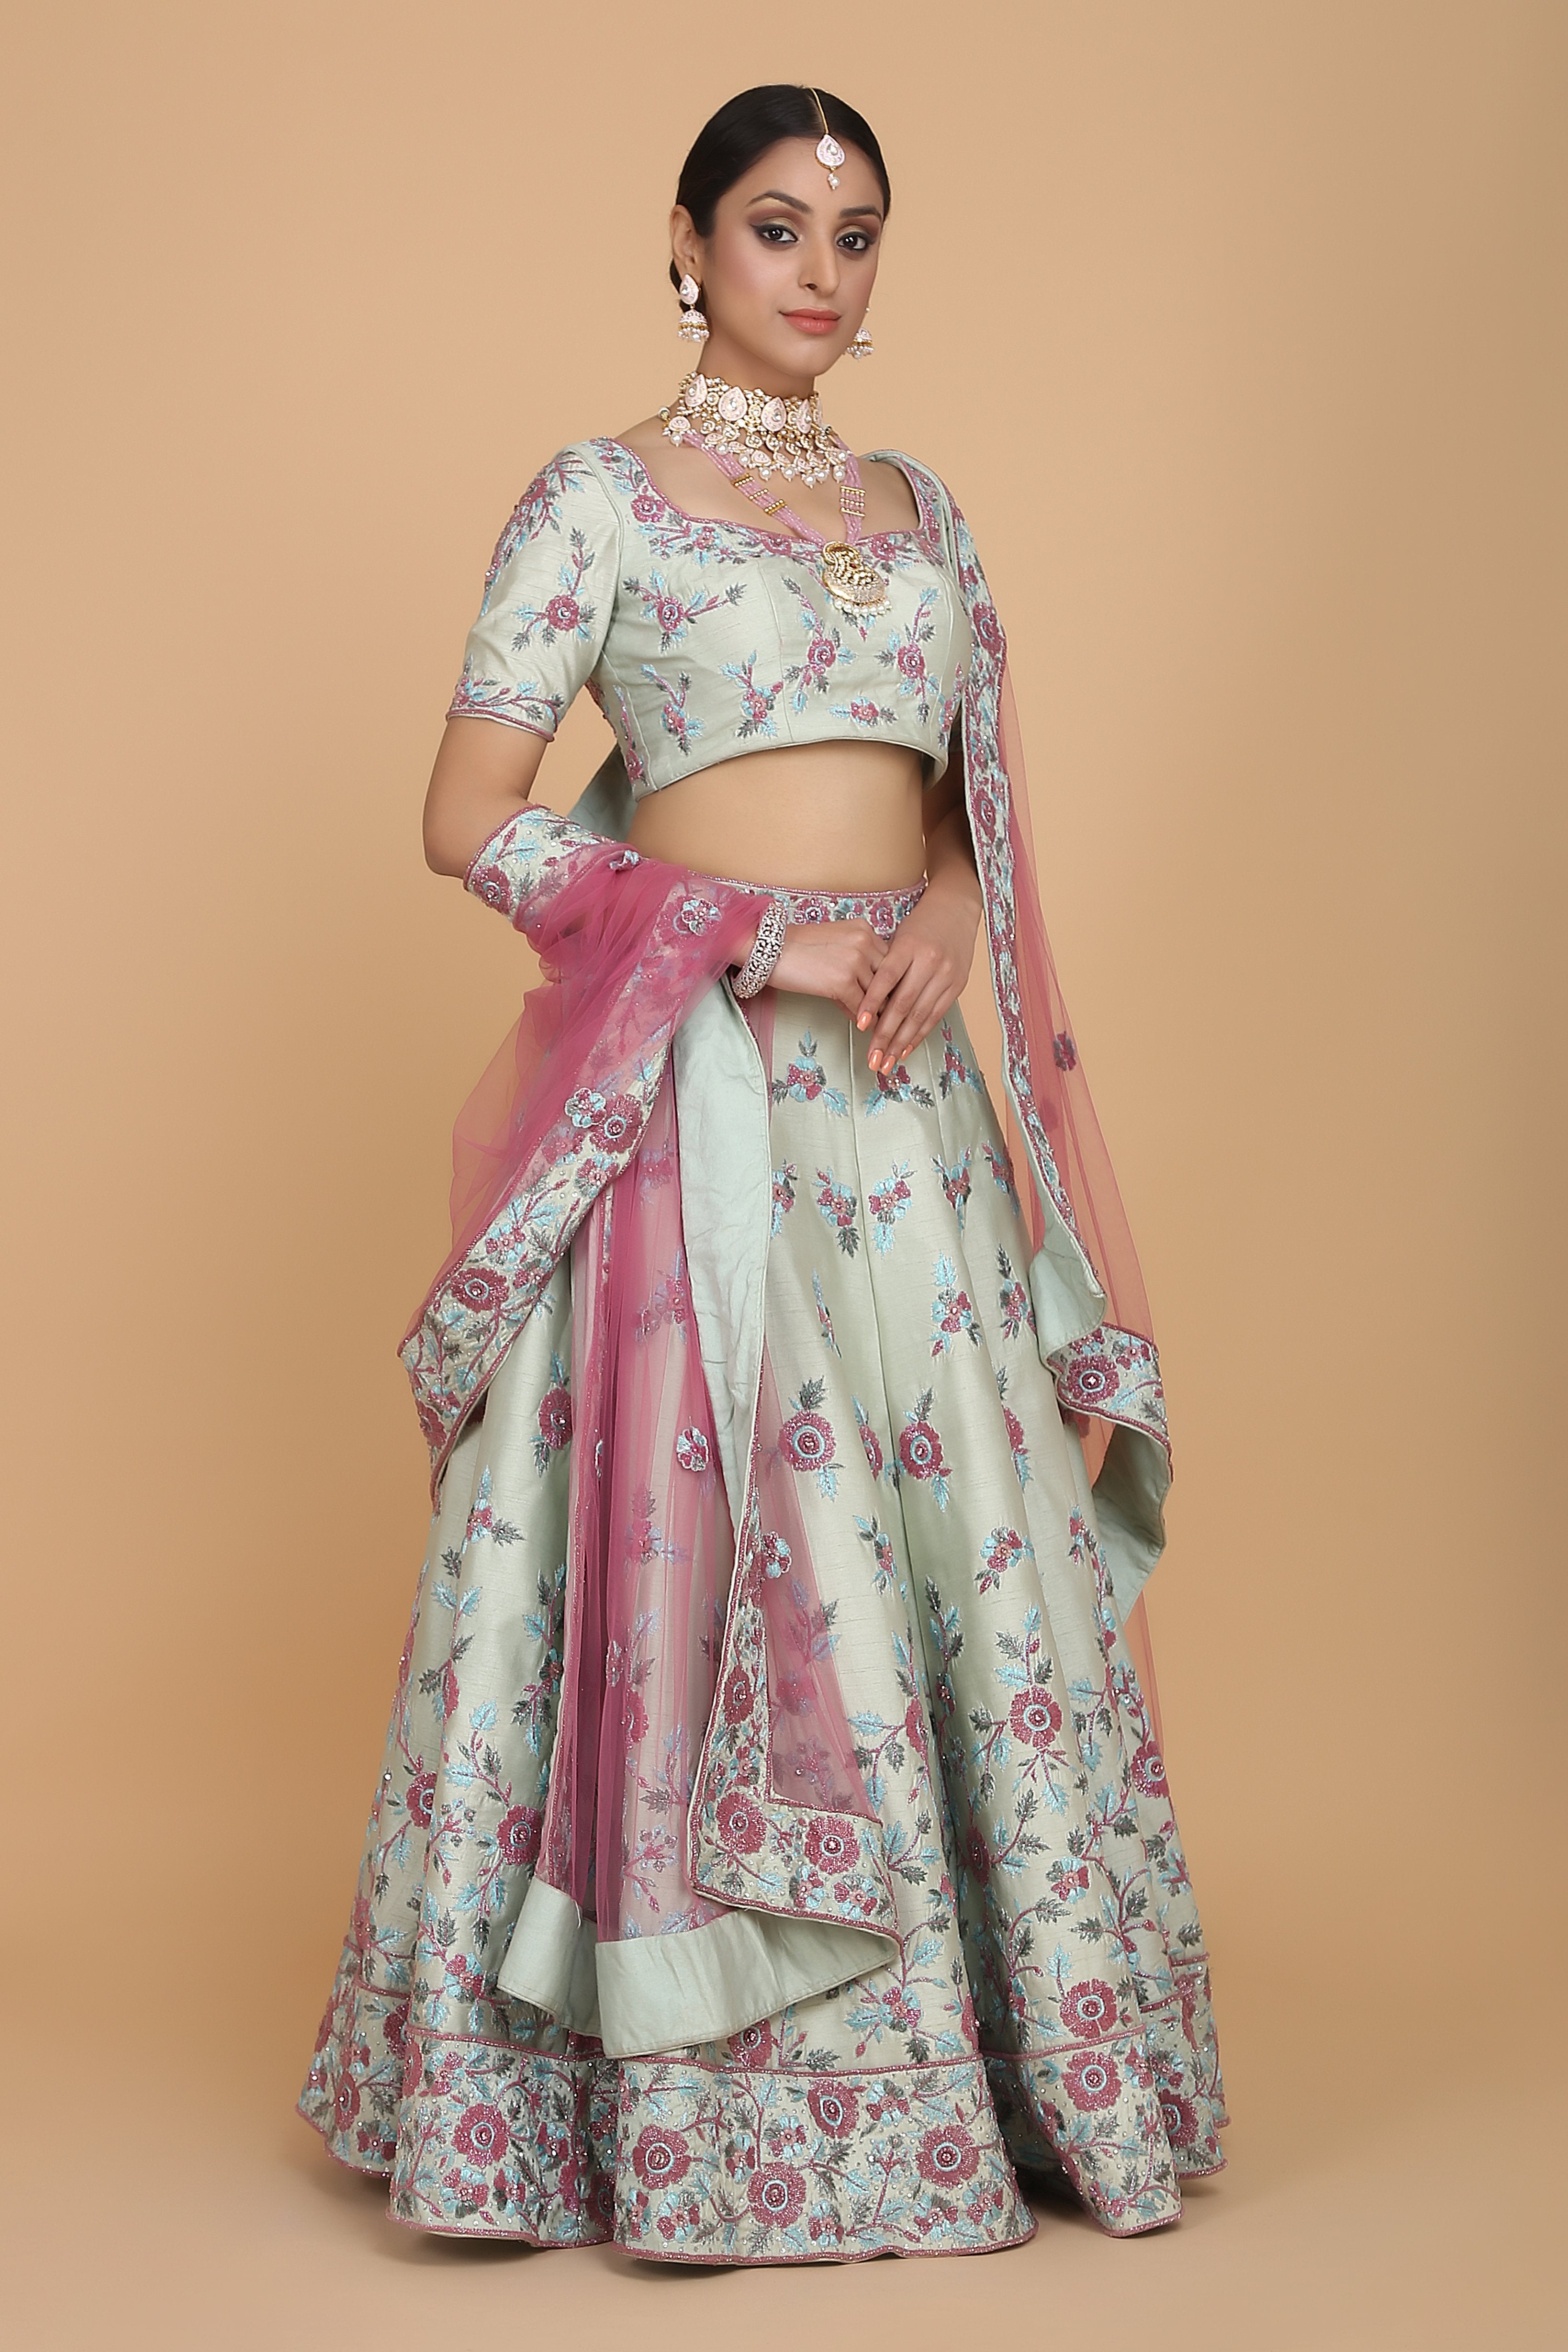 Amit GT - River Blooms - Sea Green Floral Embroidered Lehenga Set